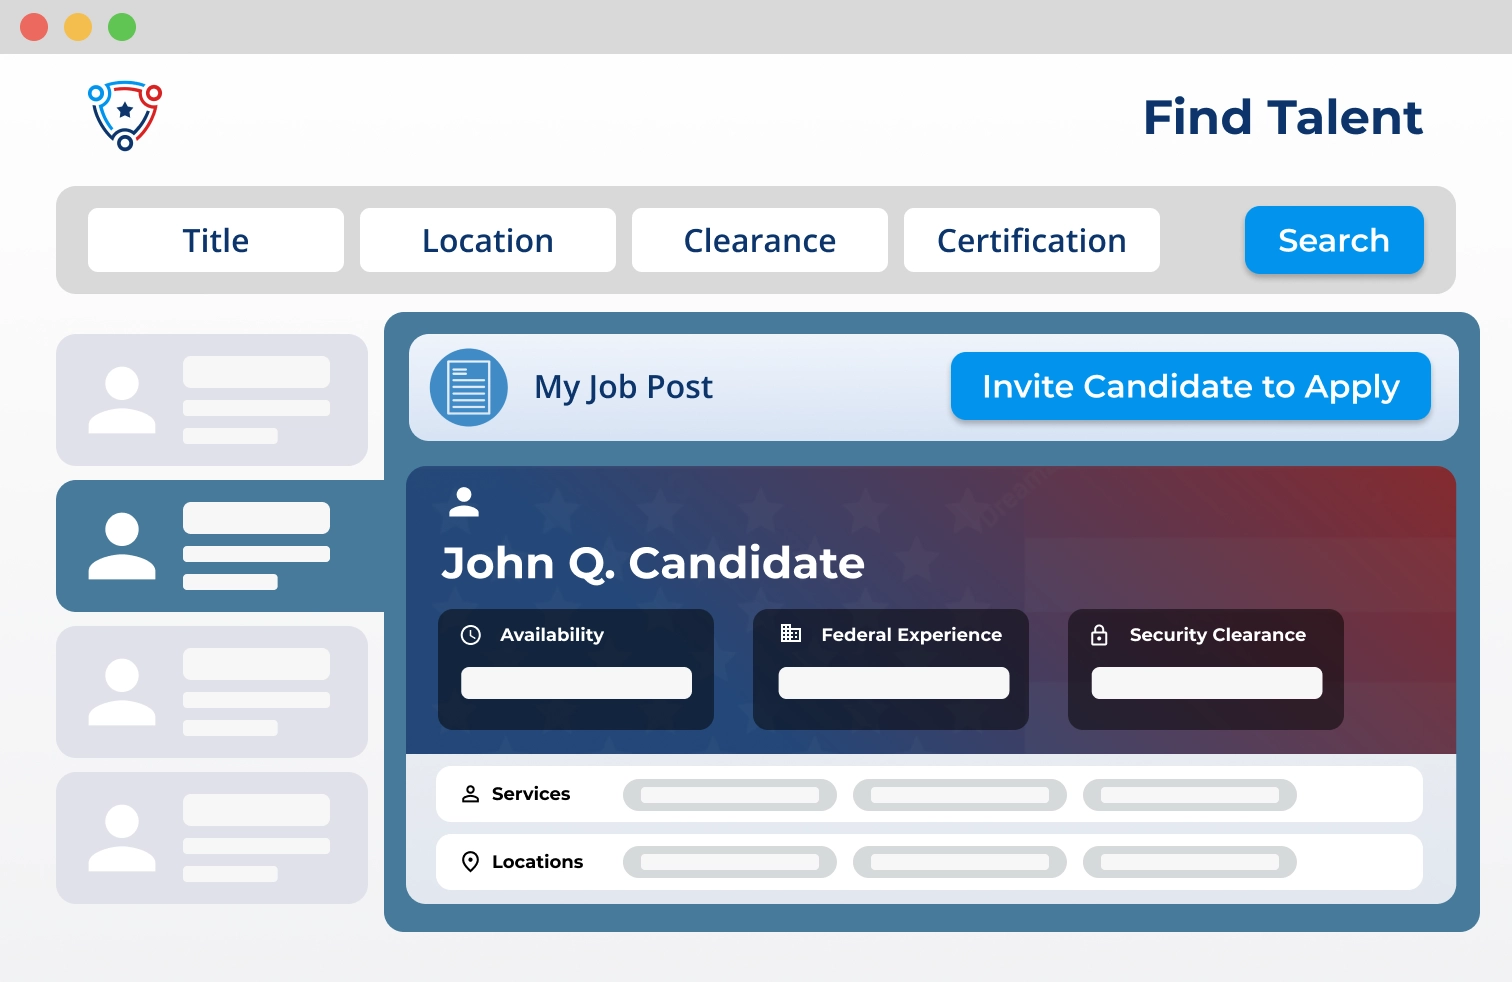 Image: Search candidates and invite